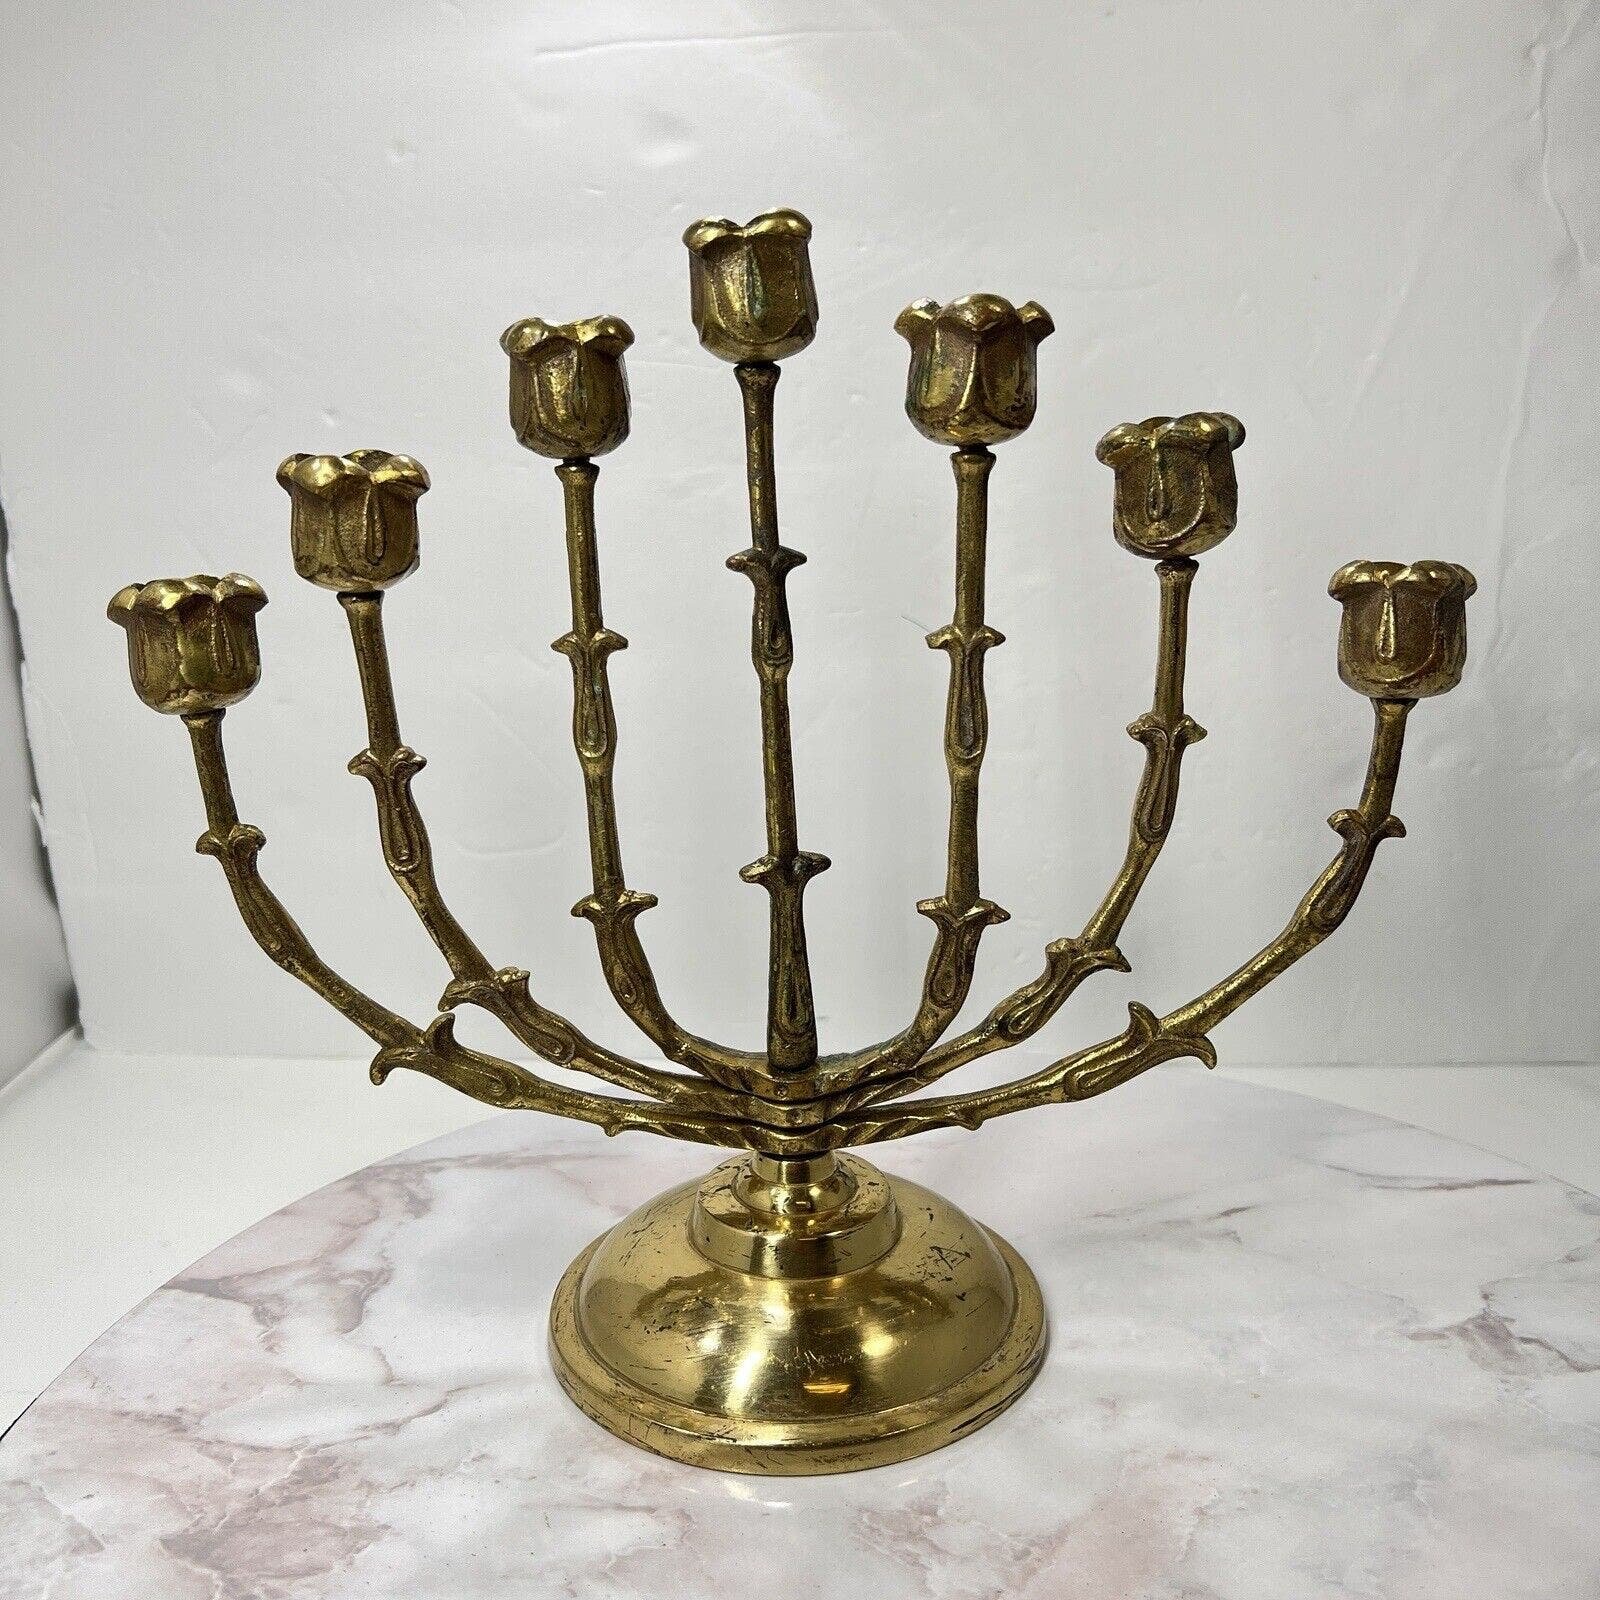 Brass Menorah 7 Rotating Movable Arms 10”Hx11.5”W Heavy FPDPAEVCL